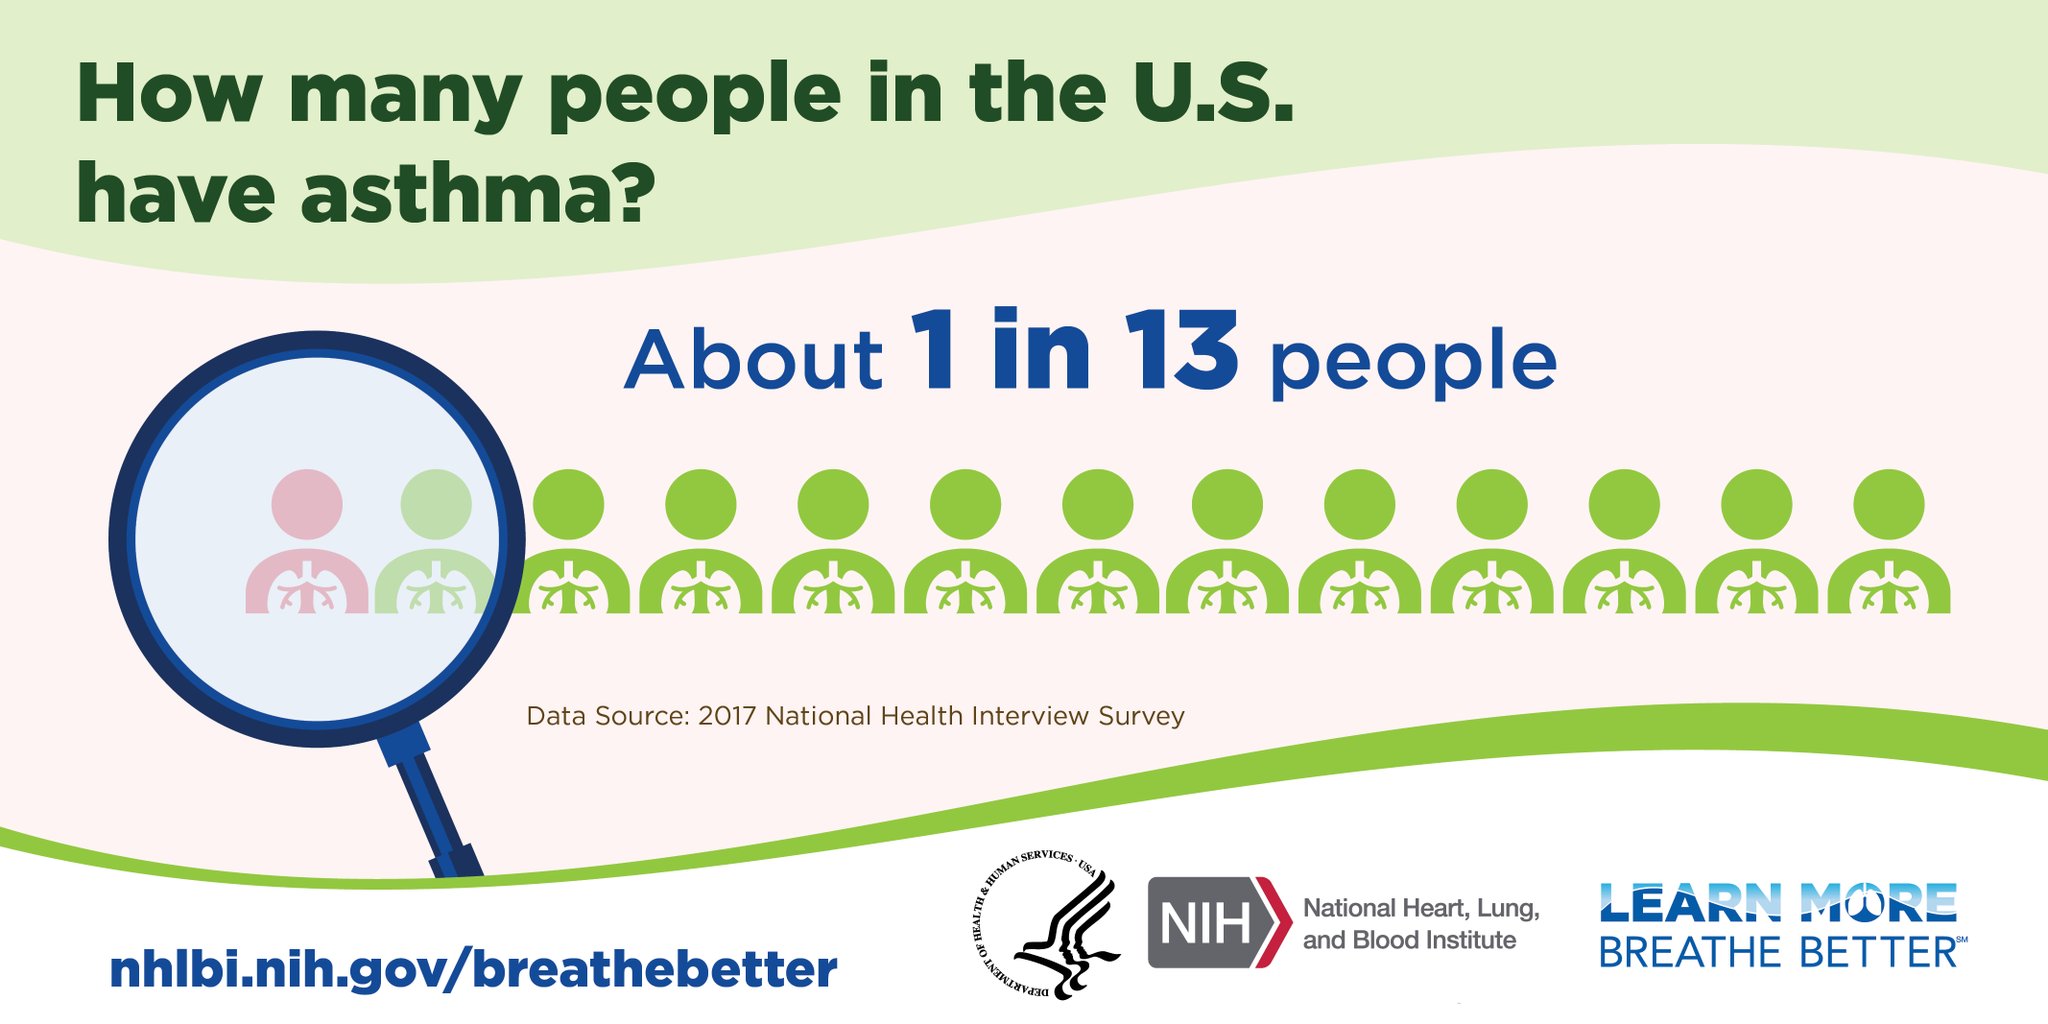 1 in 13 People Has Asthma